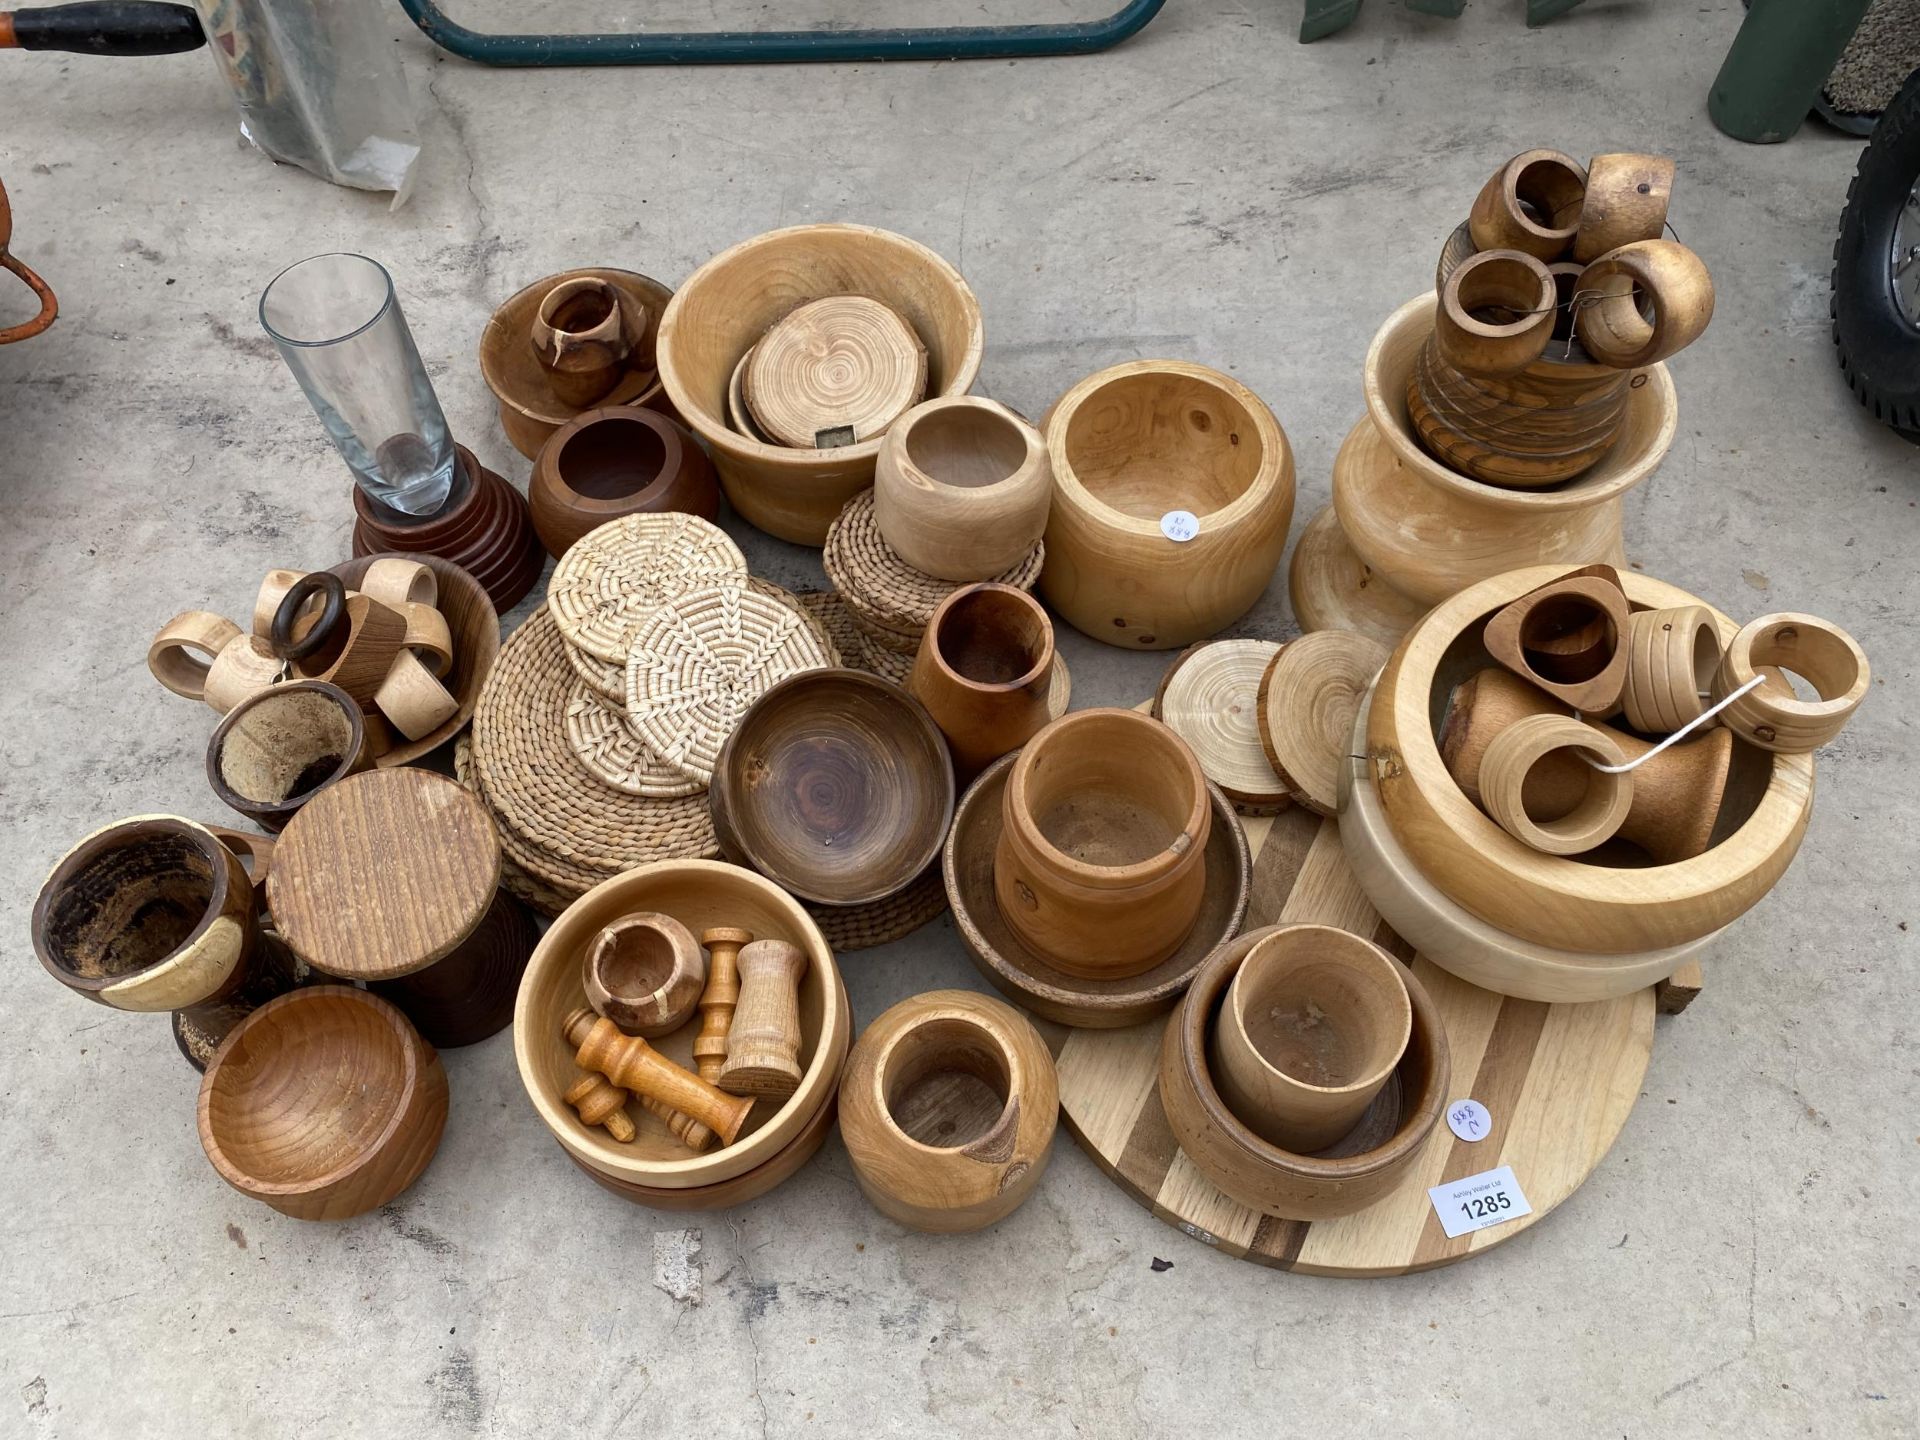 A LARGE ASSORTMENT OF TURNED TREEN ITEMS TO INCLUDE BOWLS, VASES AND NAPKIN RINGS ETC